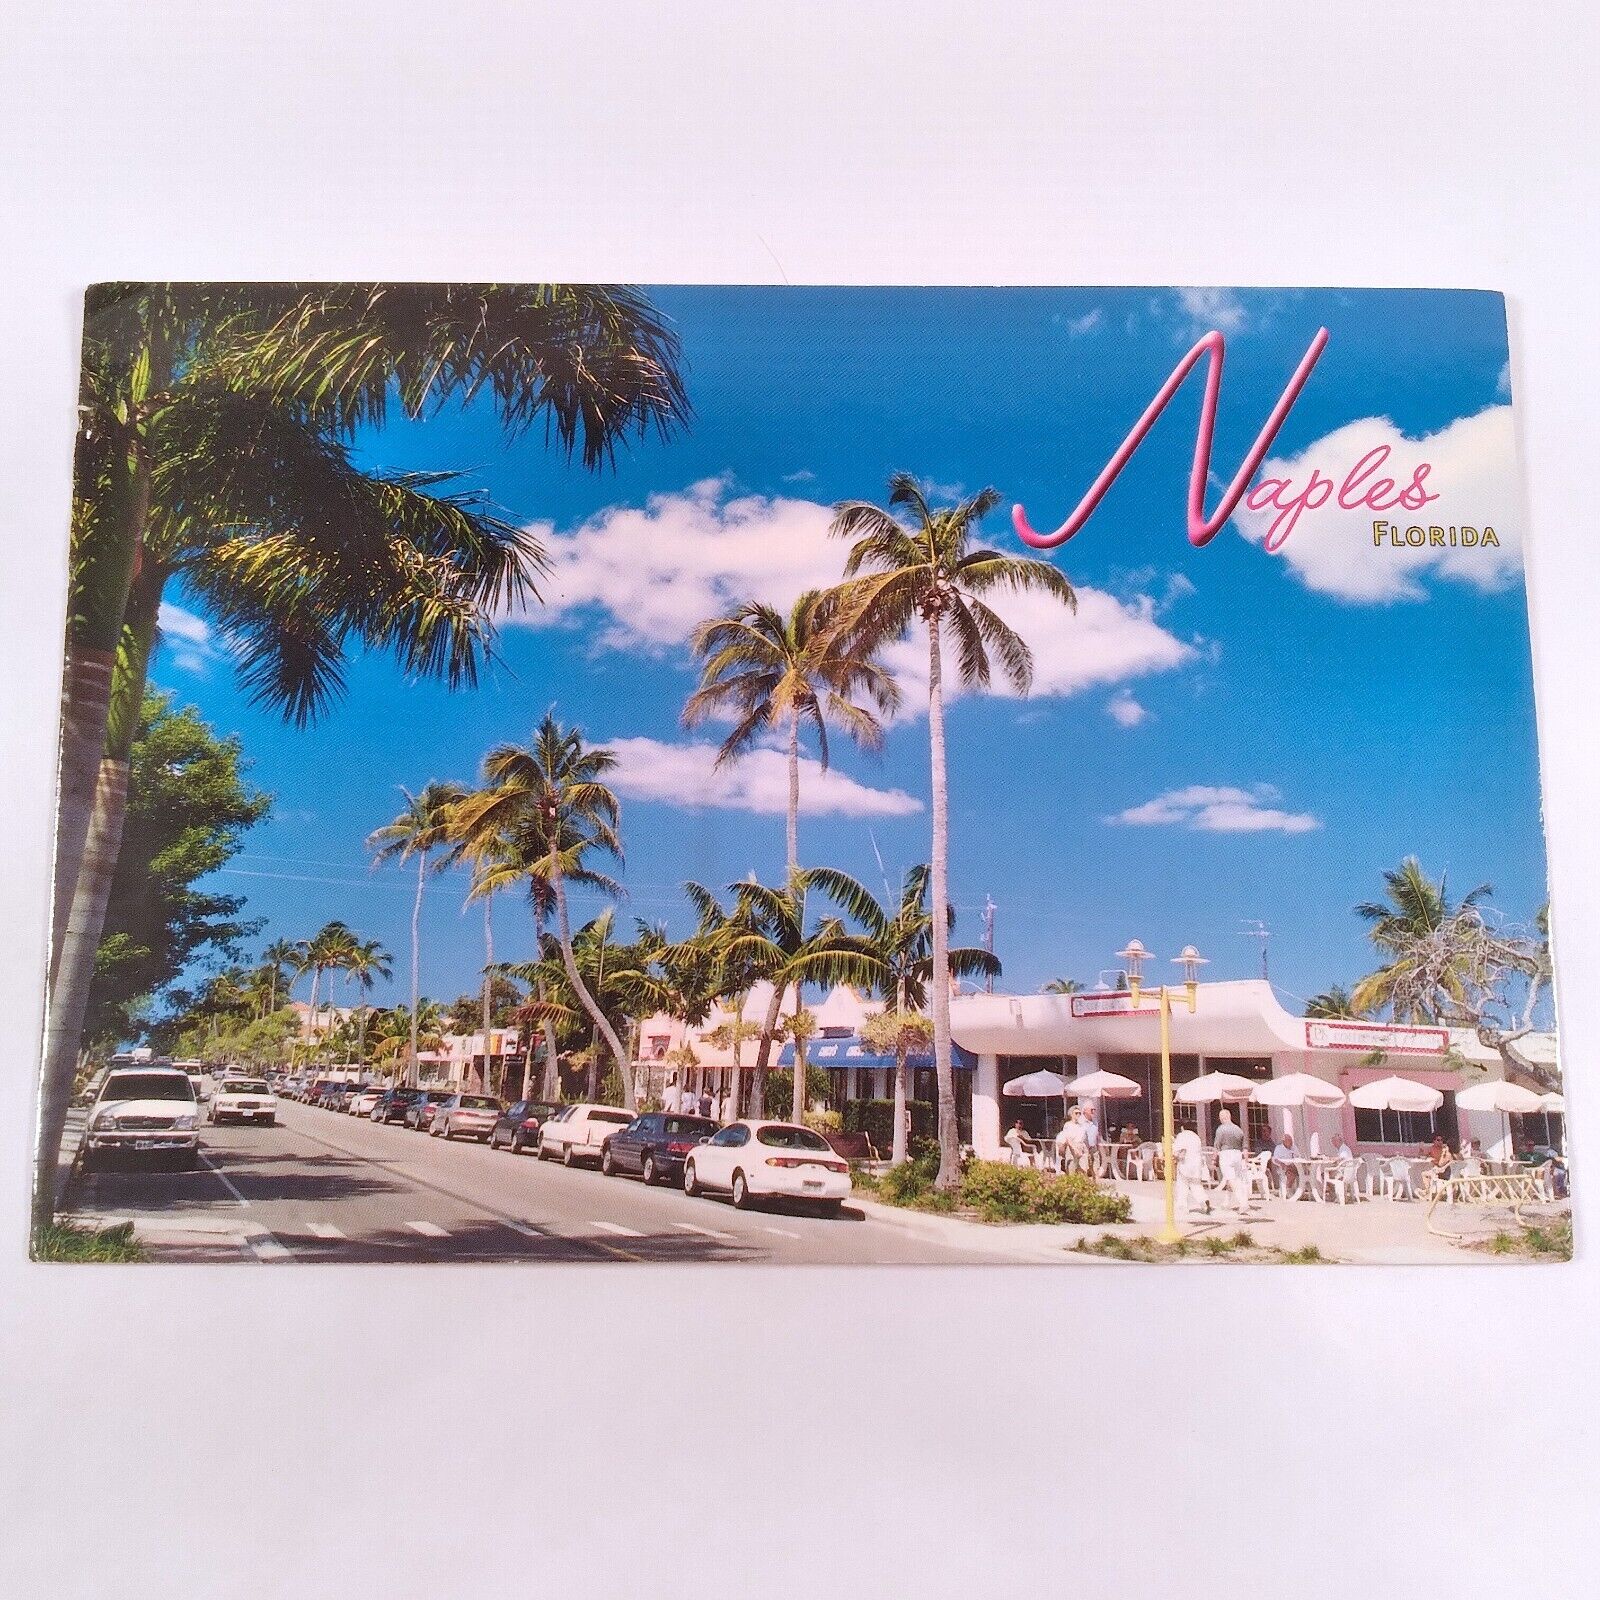 Naples Florida -5th Avenue in Old Naples- Street View Postcard Posted 2005